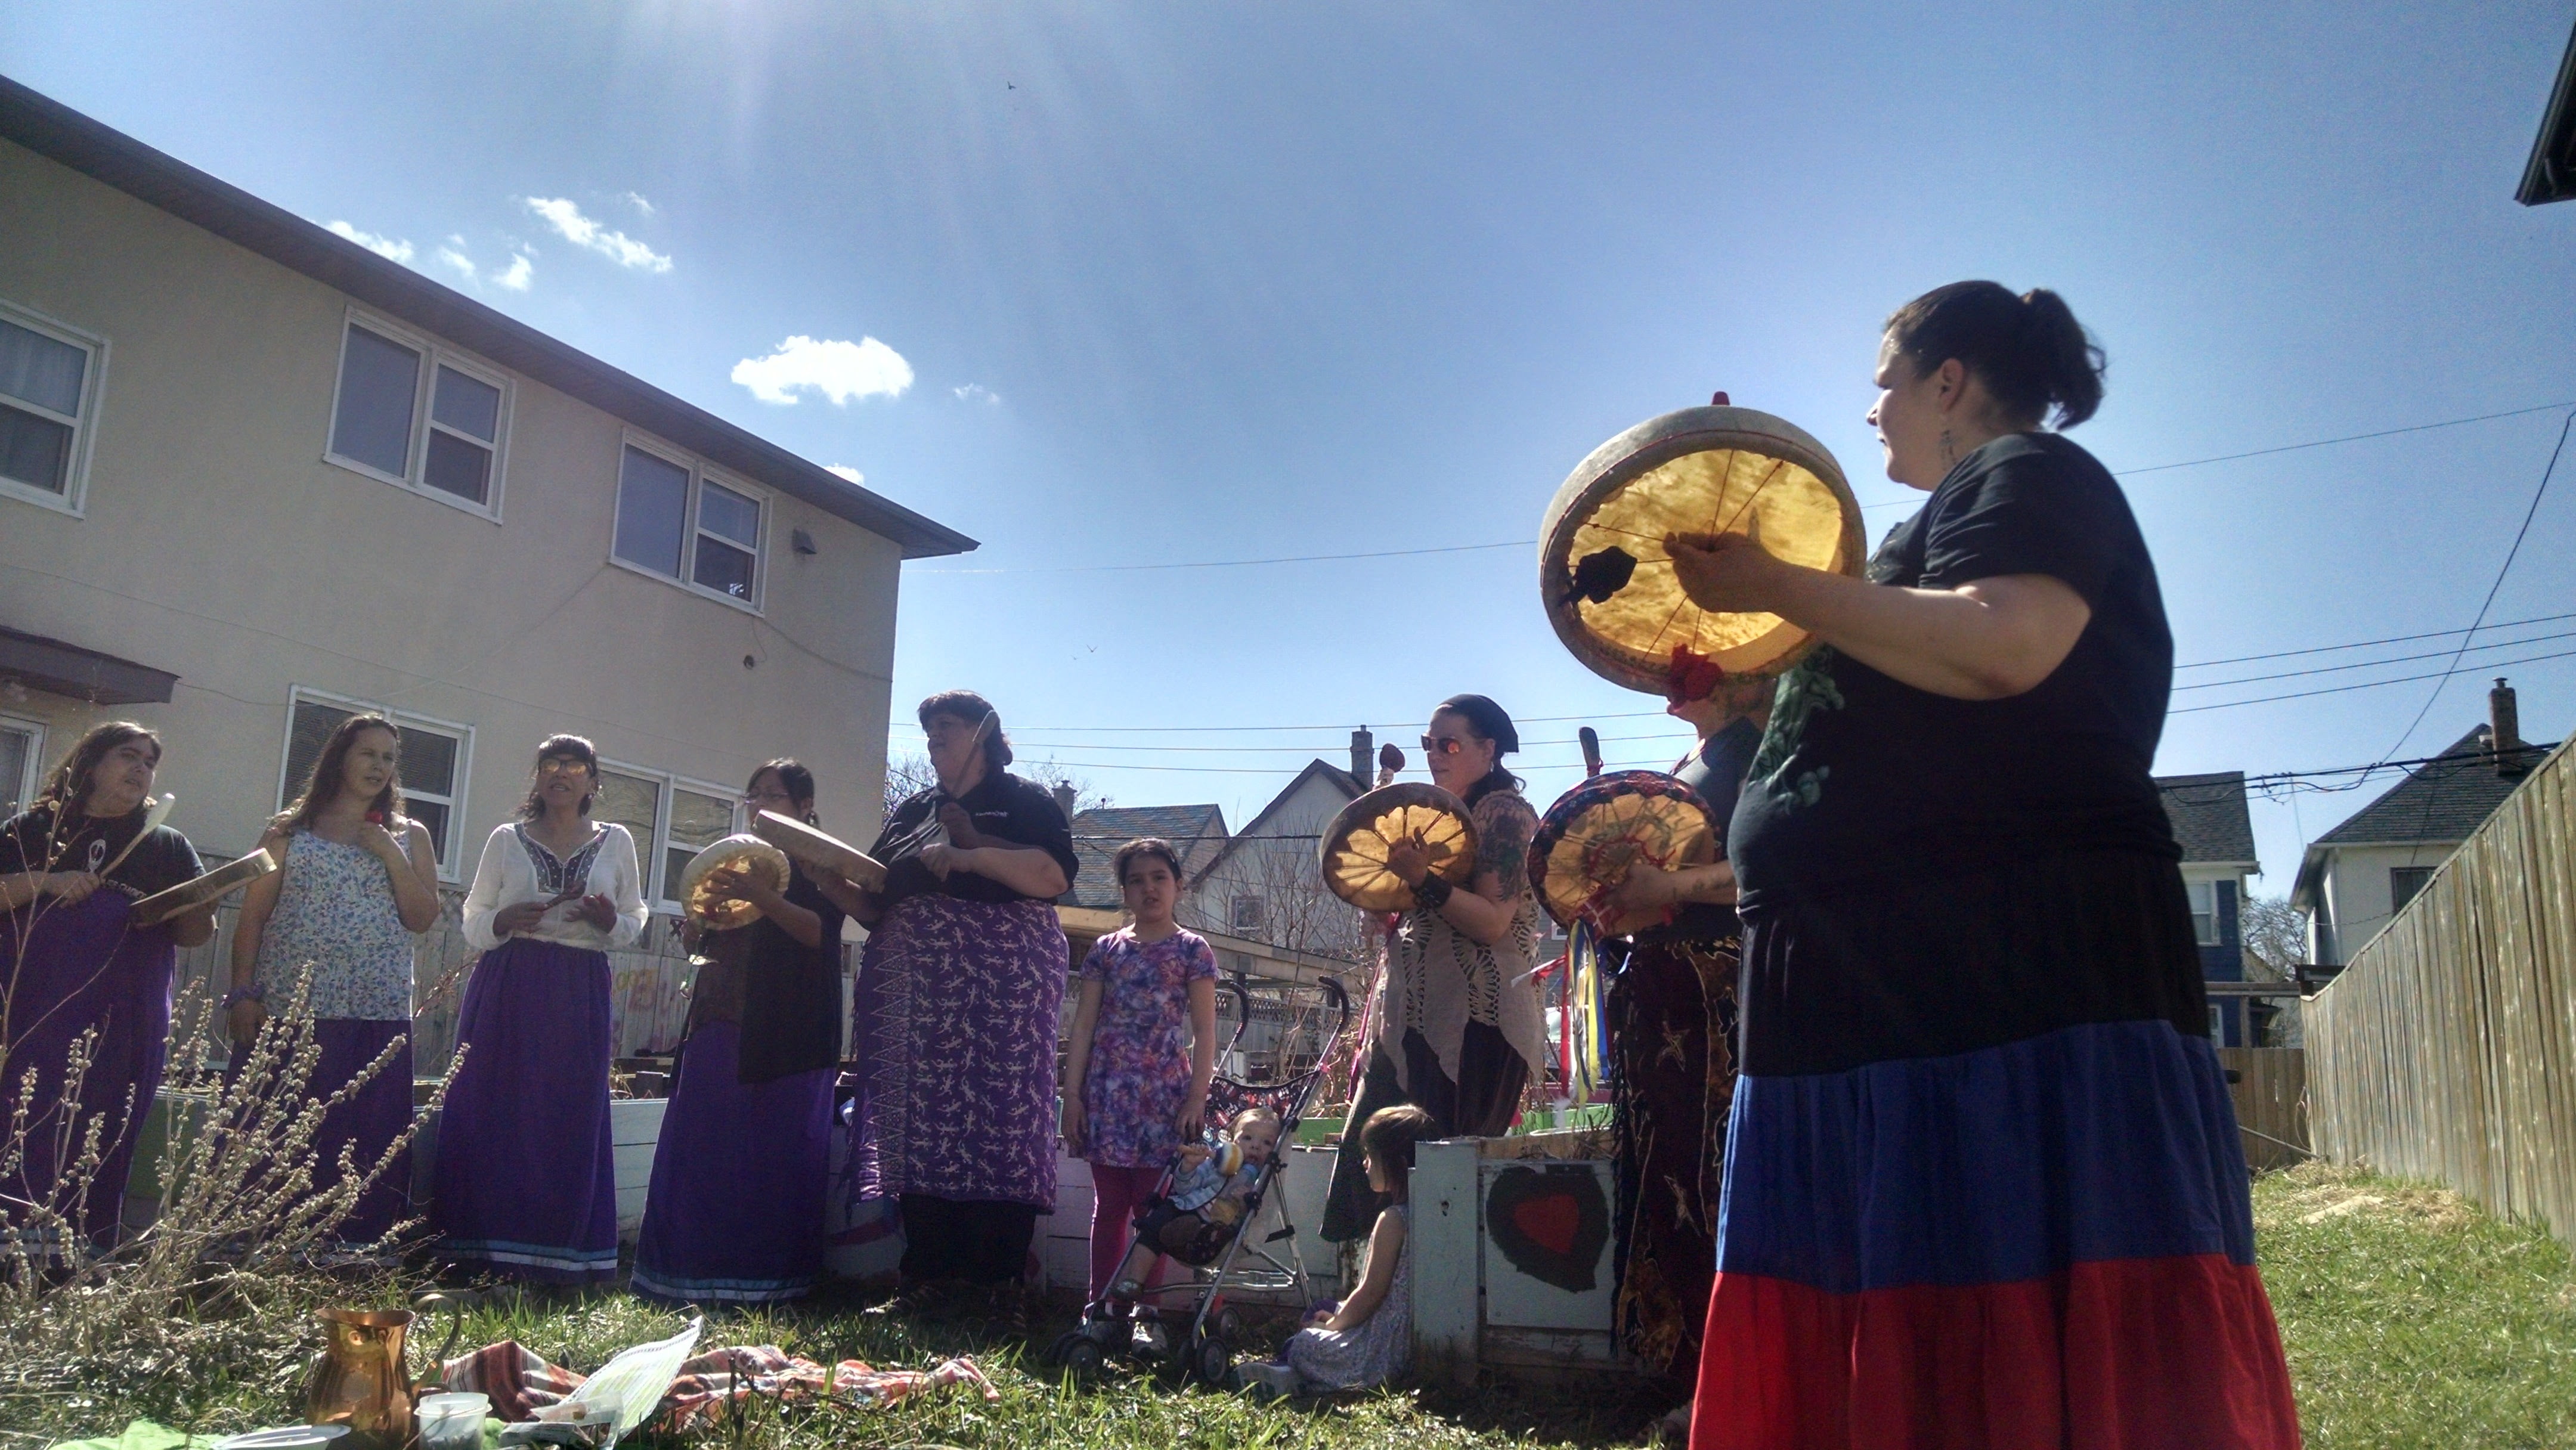 Group of women singing with hand drums in a community garden on a sunny day.